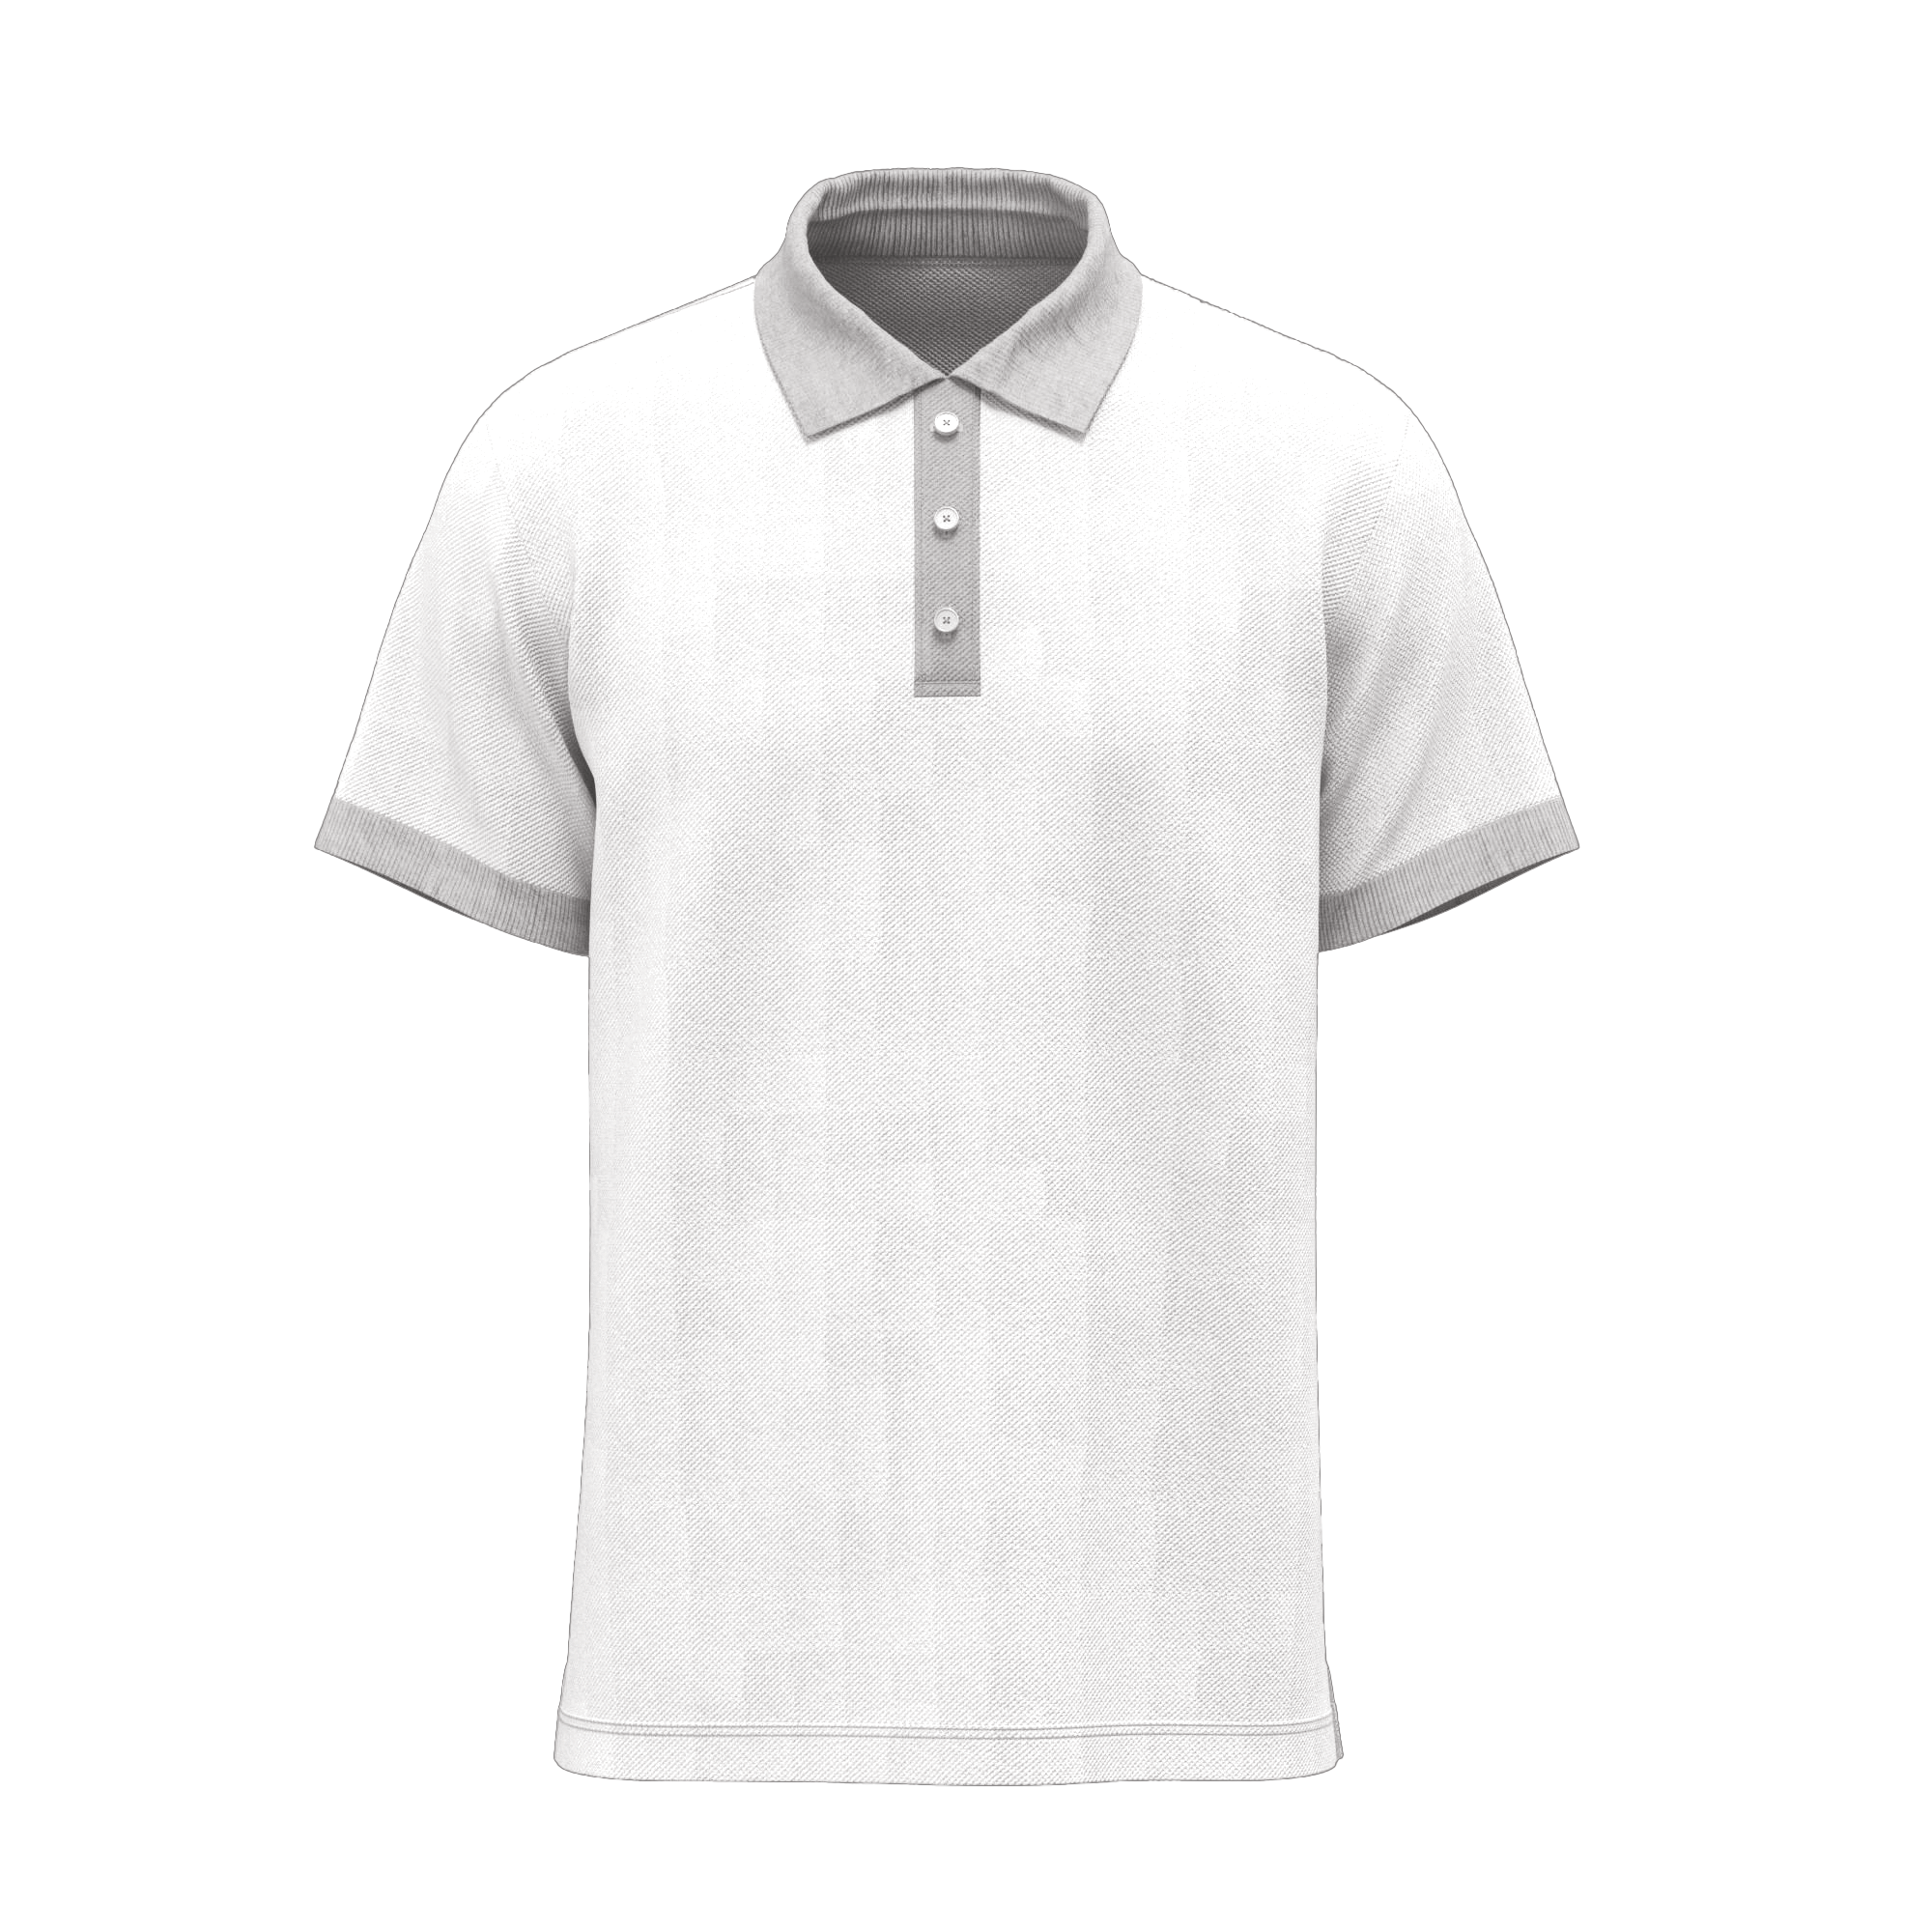 polo-shirt-front